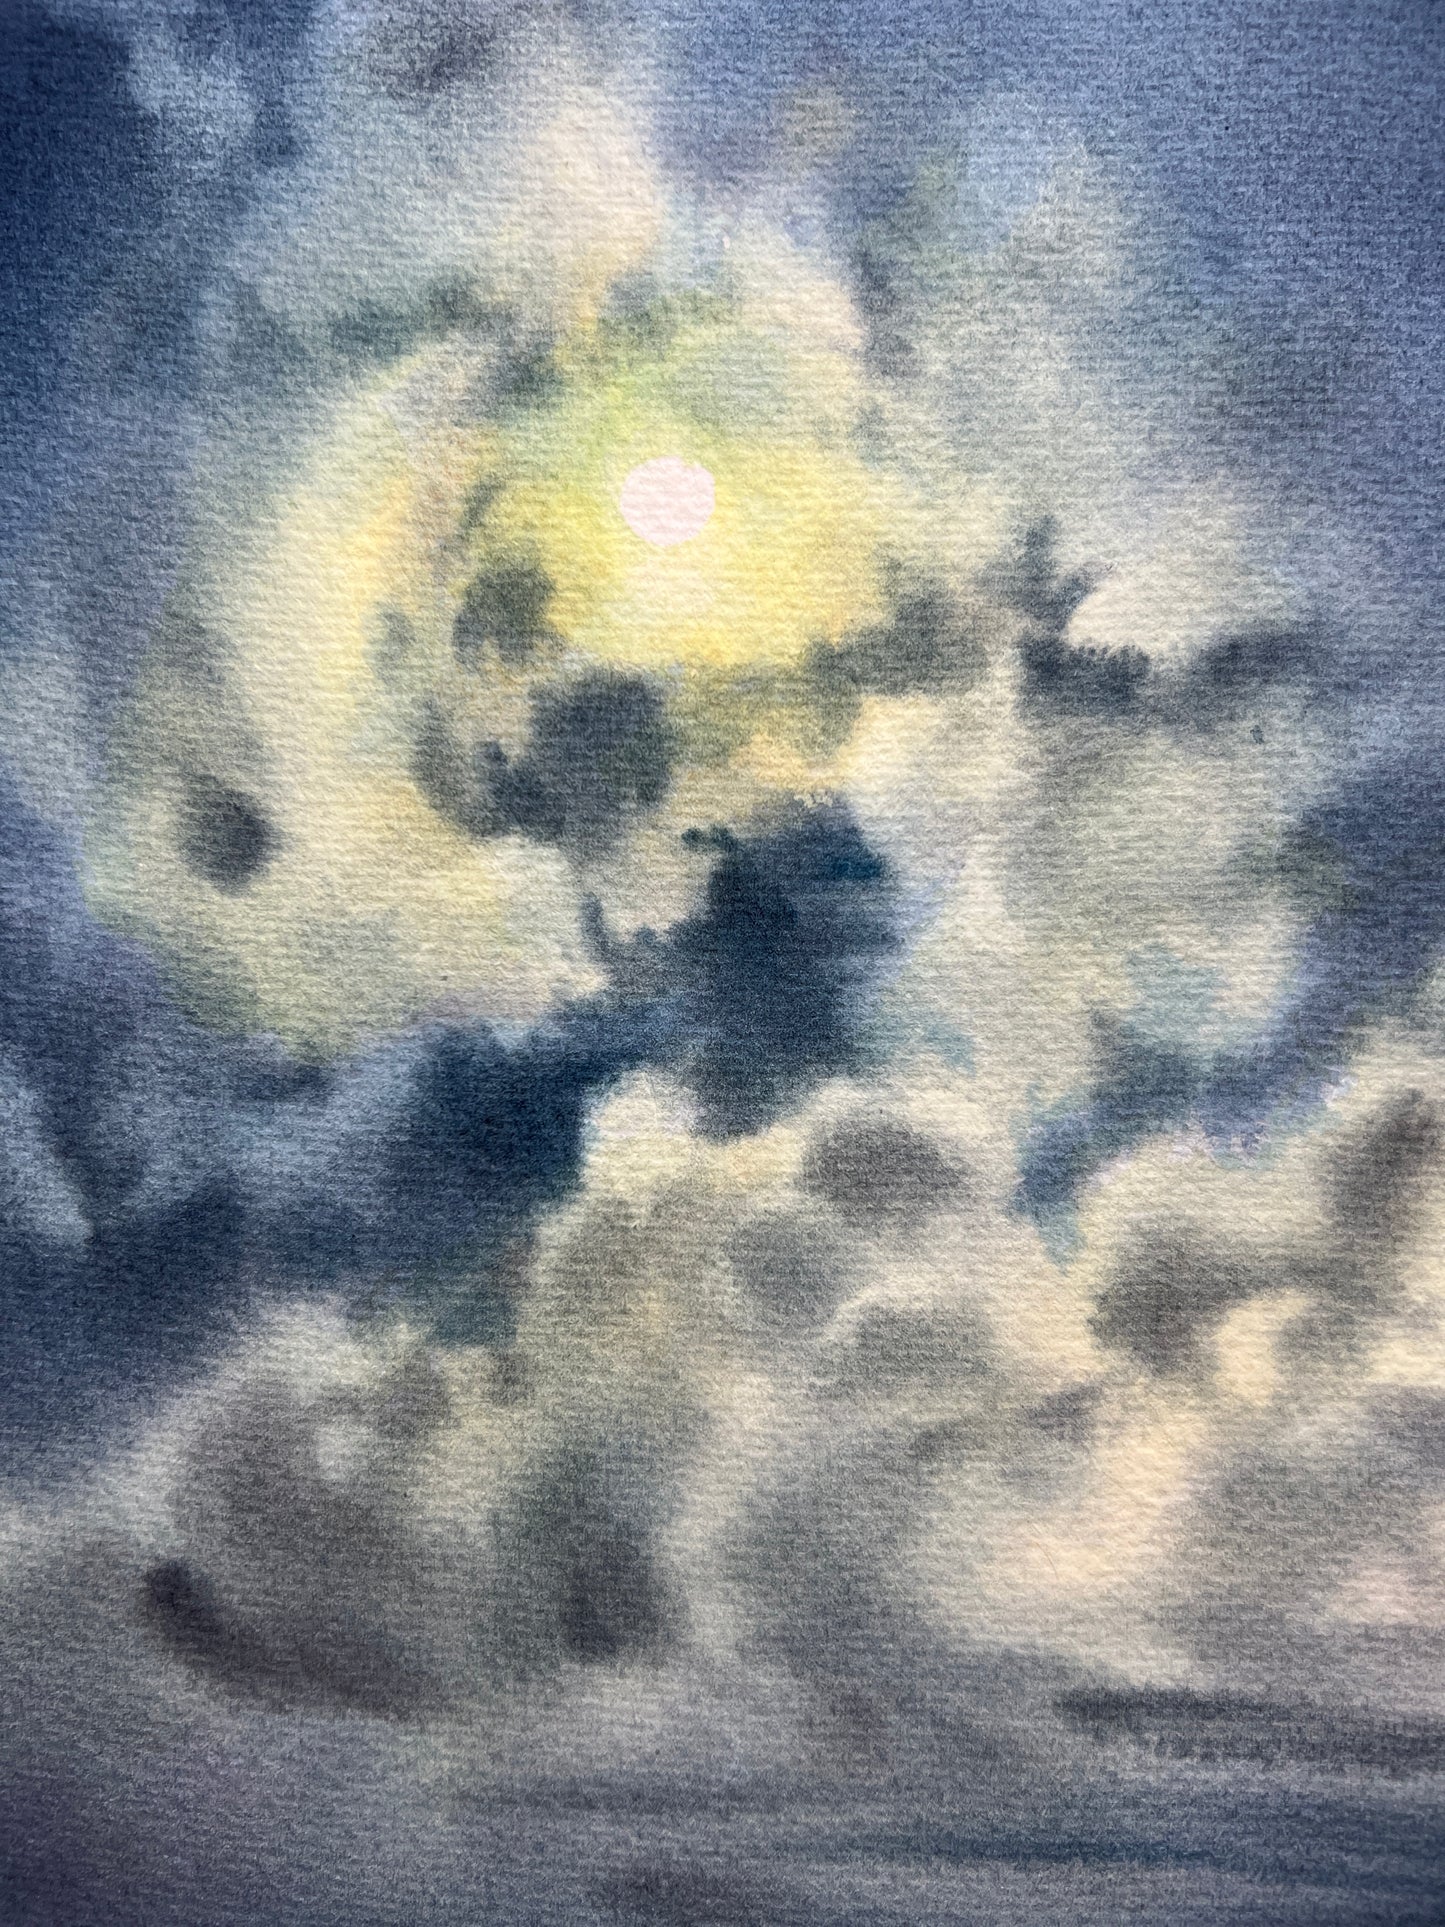 Moon Art Original Watercolor Painting 'In the Moonlight #10' - Nautical Wall Decor, Moonlit Sea & Clouds, Ideal Housewarming Gift